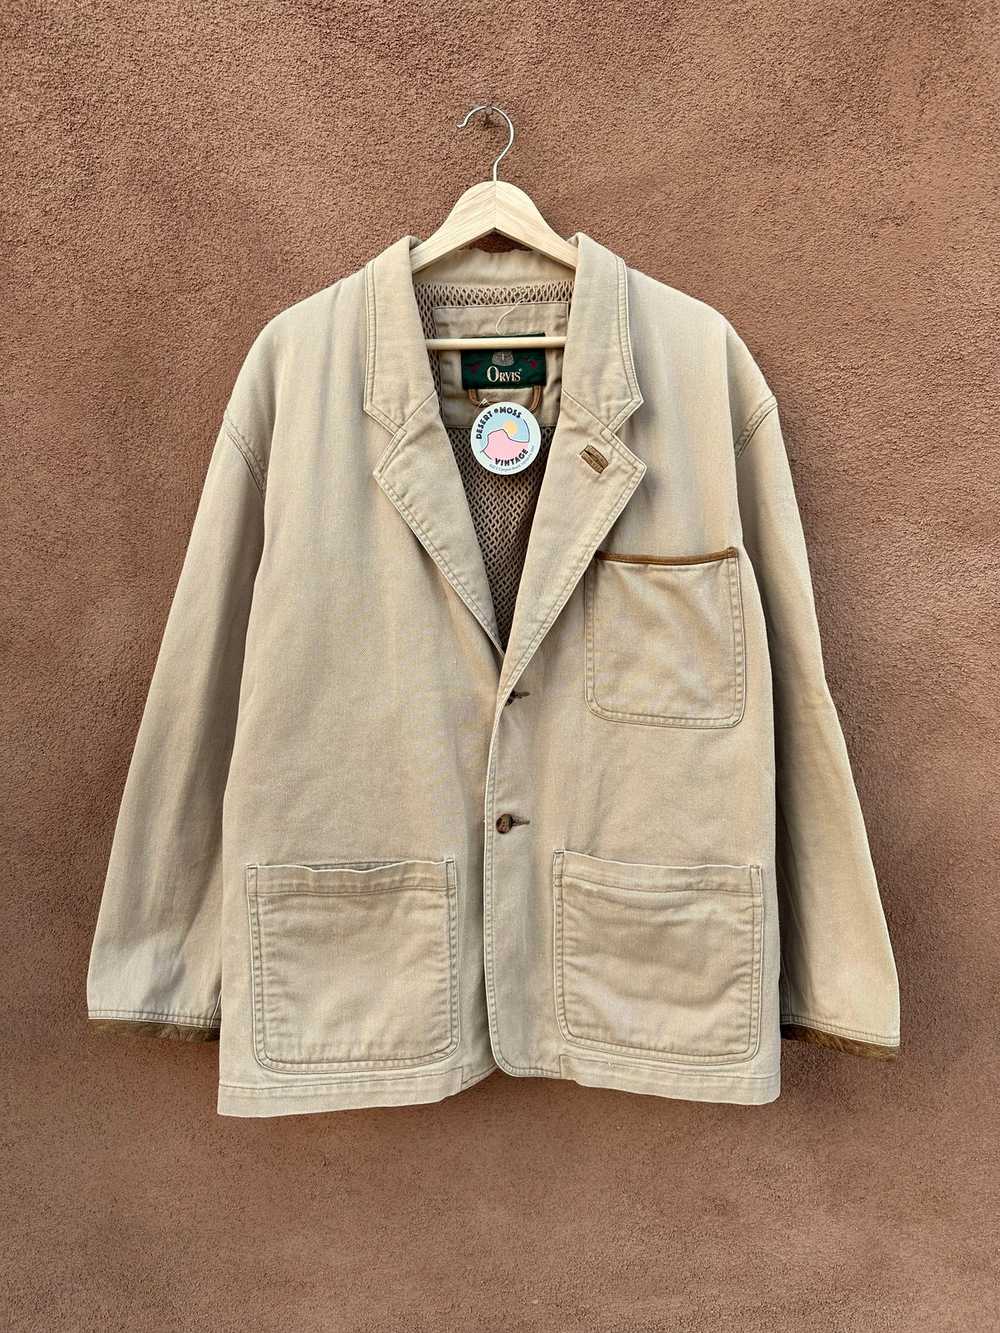 Orvis Hunting Blazer with Leather Trim/Elbow Patc… - image 1